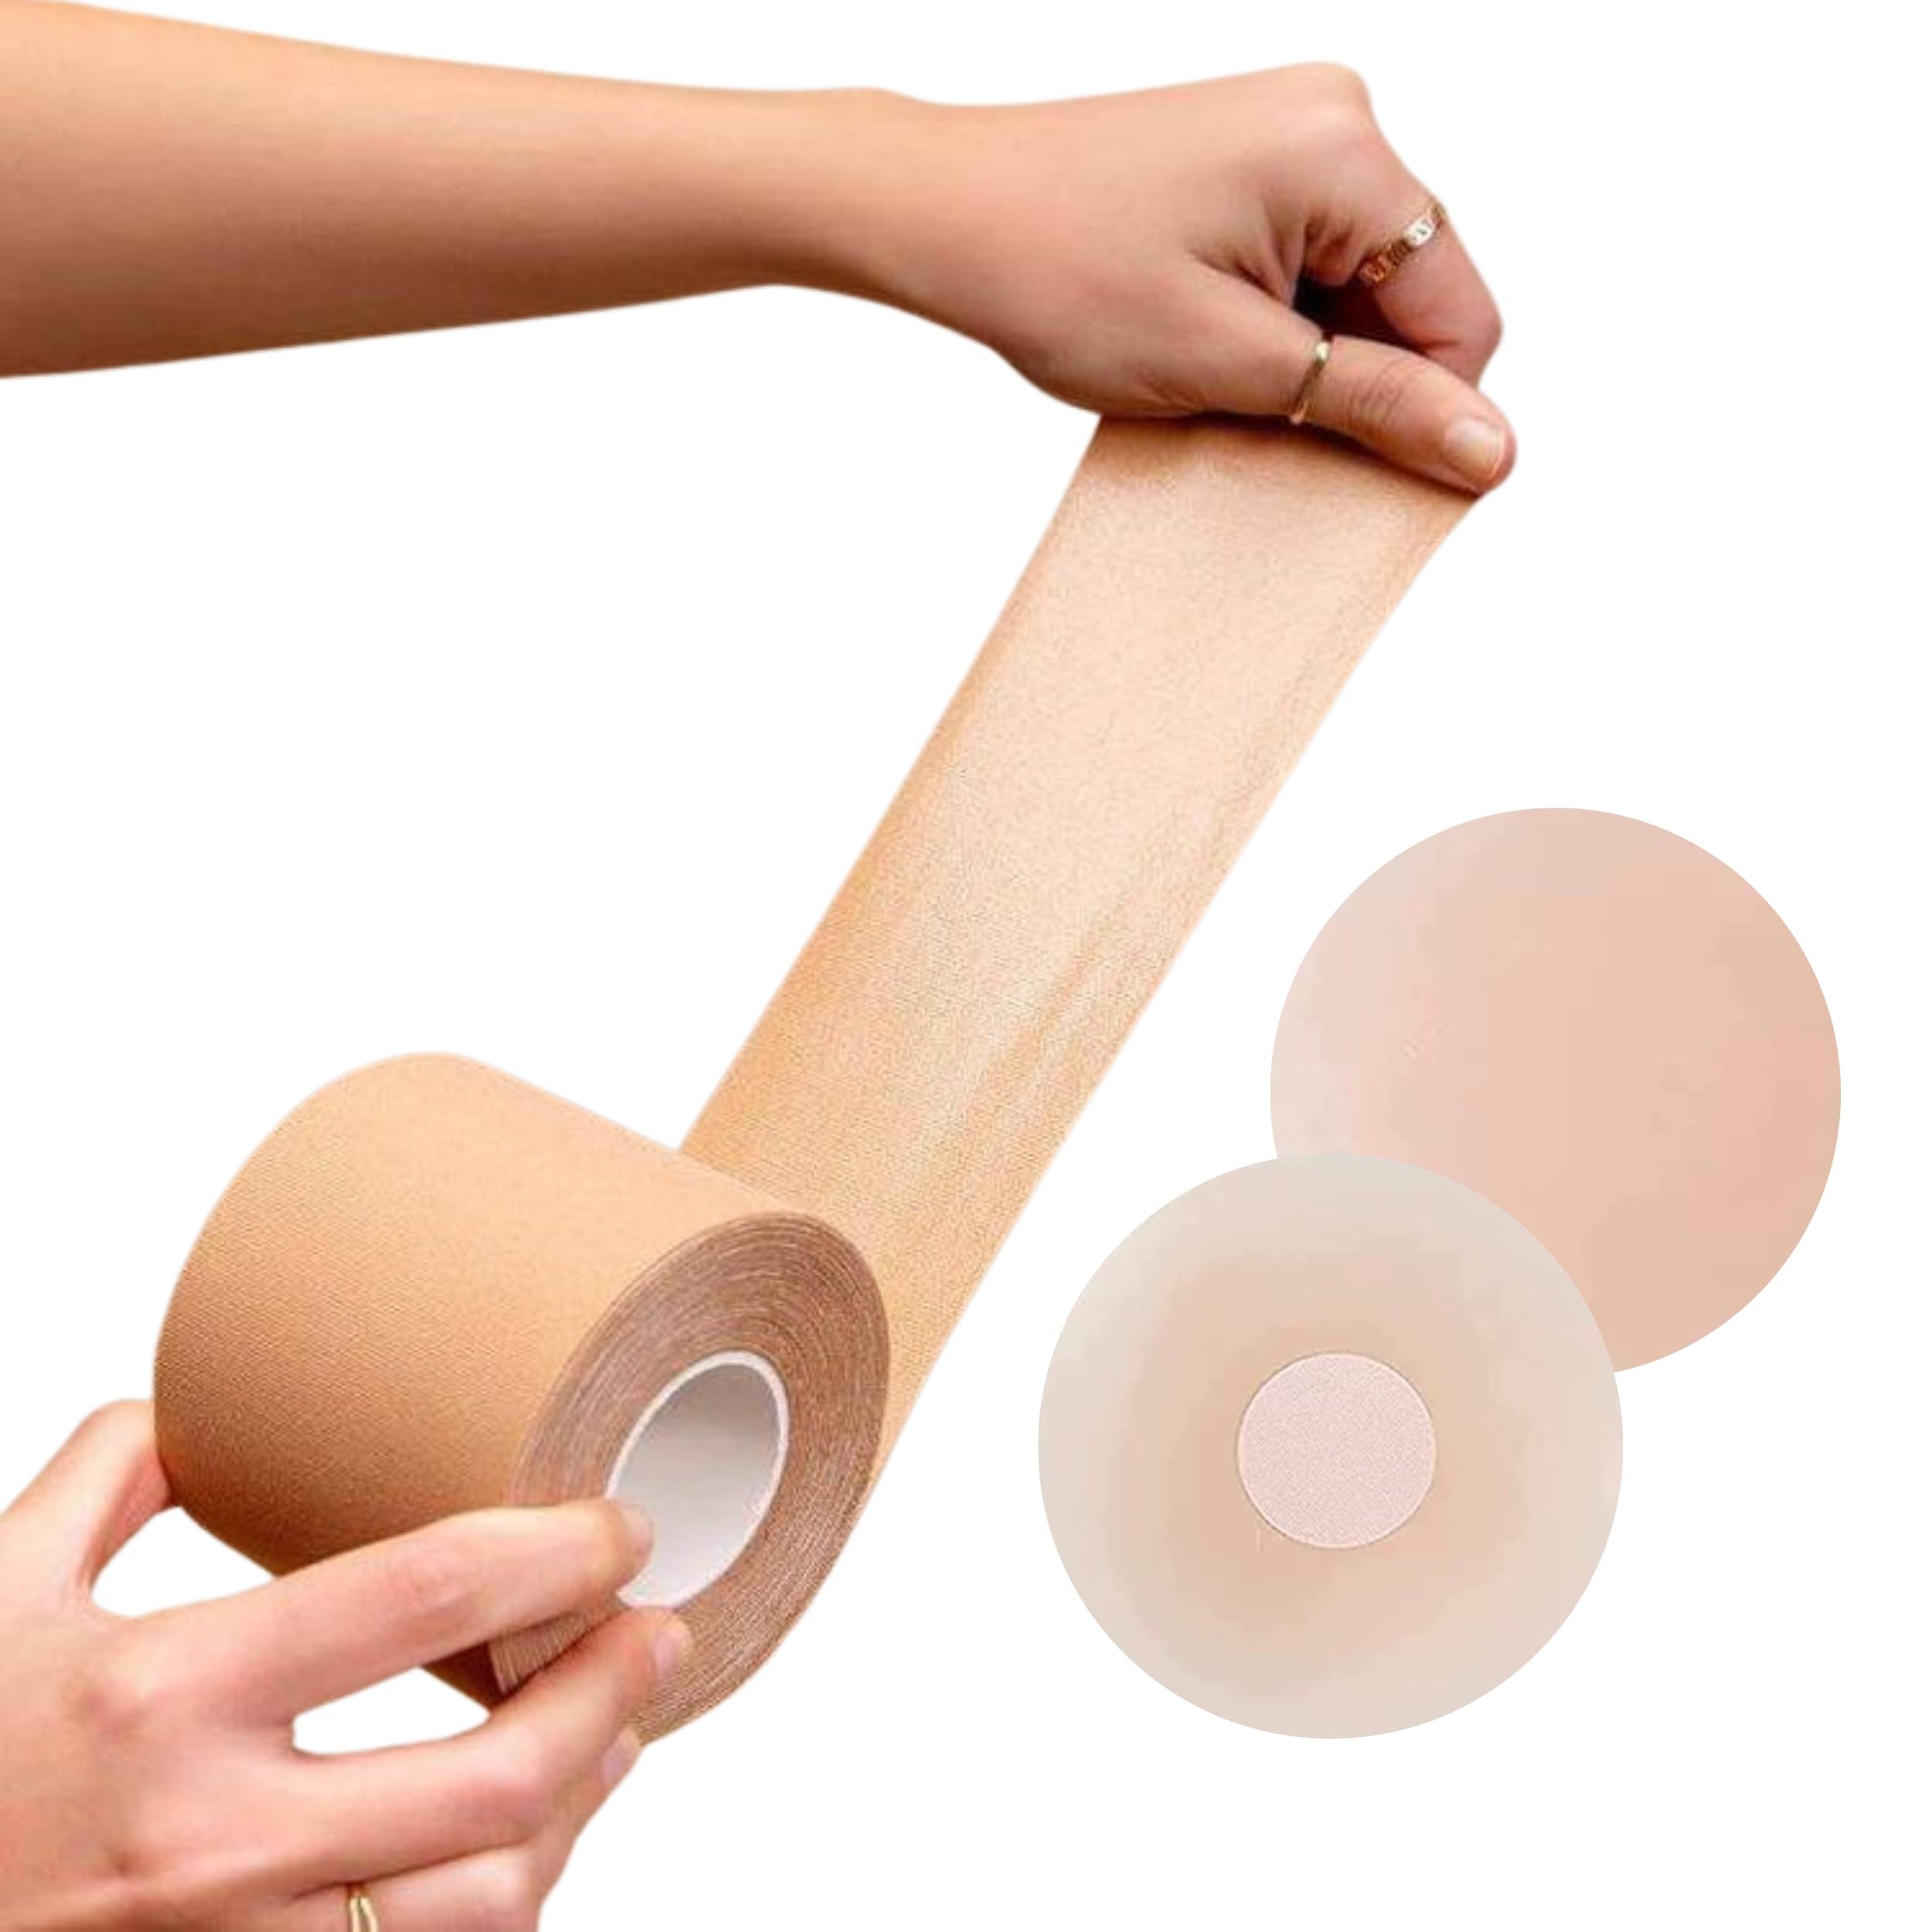 Boob Tape For Breast Lift, Achieve Chest Brace Lift & Contour Of Breasts, Sticky Body Tape For Push Up & Shape In All Clothing Fabric Dress Types